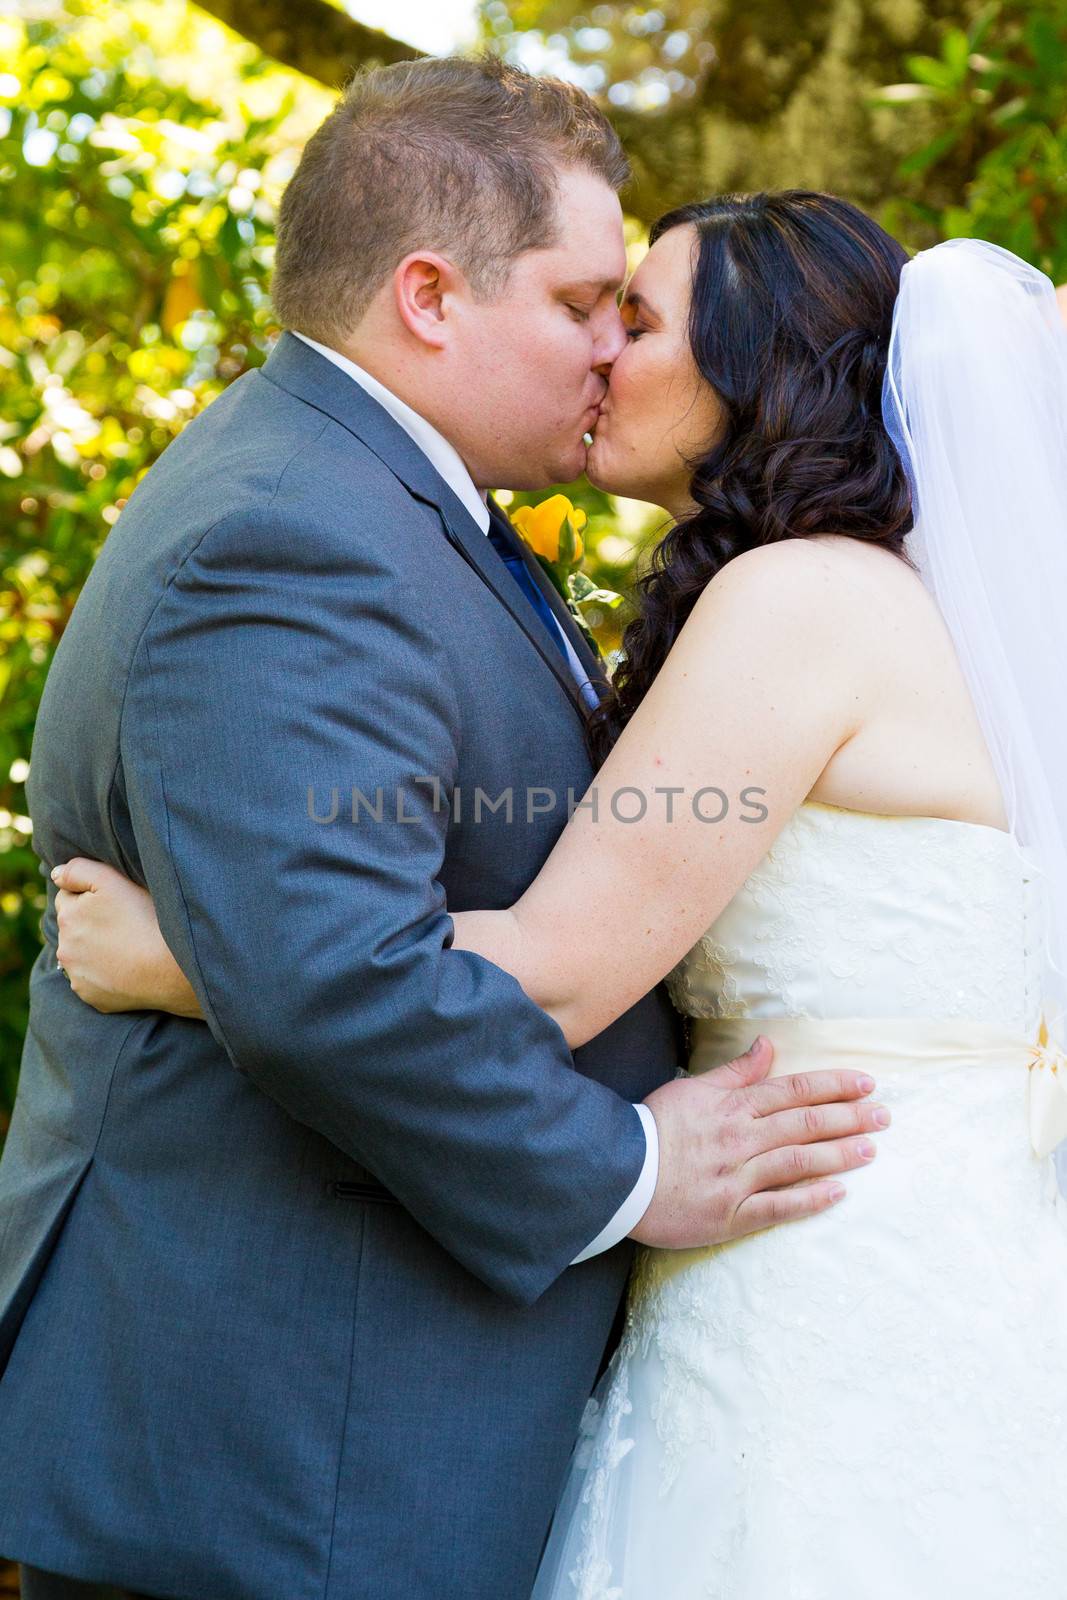 A bride and groom share their first kiss as a married couple and have a moment together during their marriage vows ceremony at an outdoor park in Oregon.